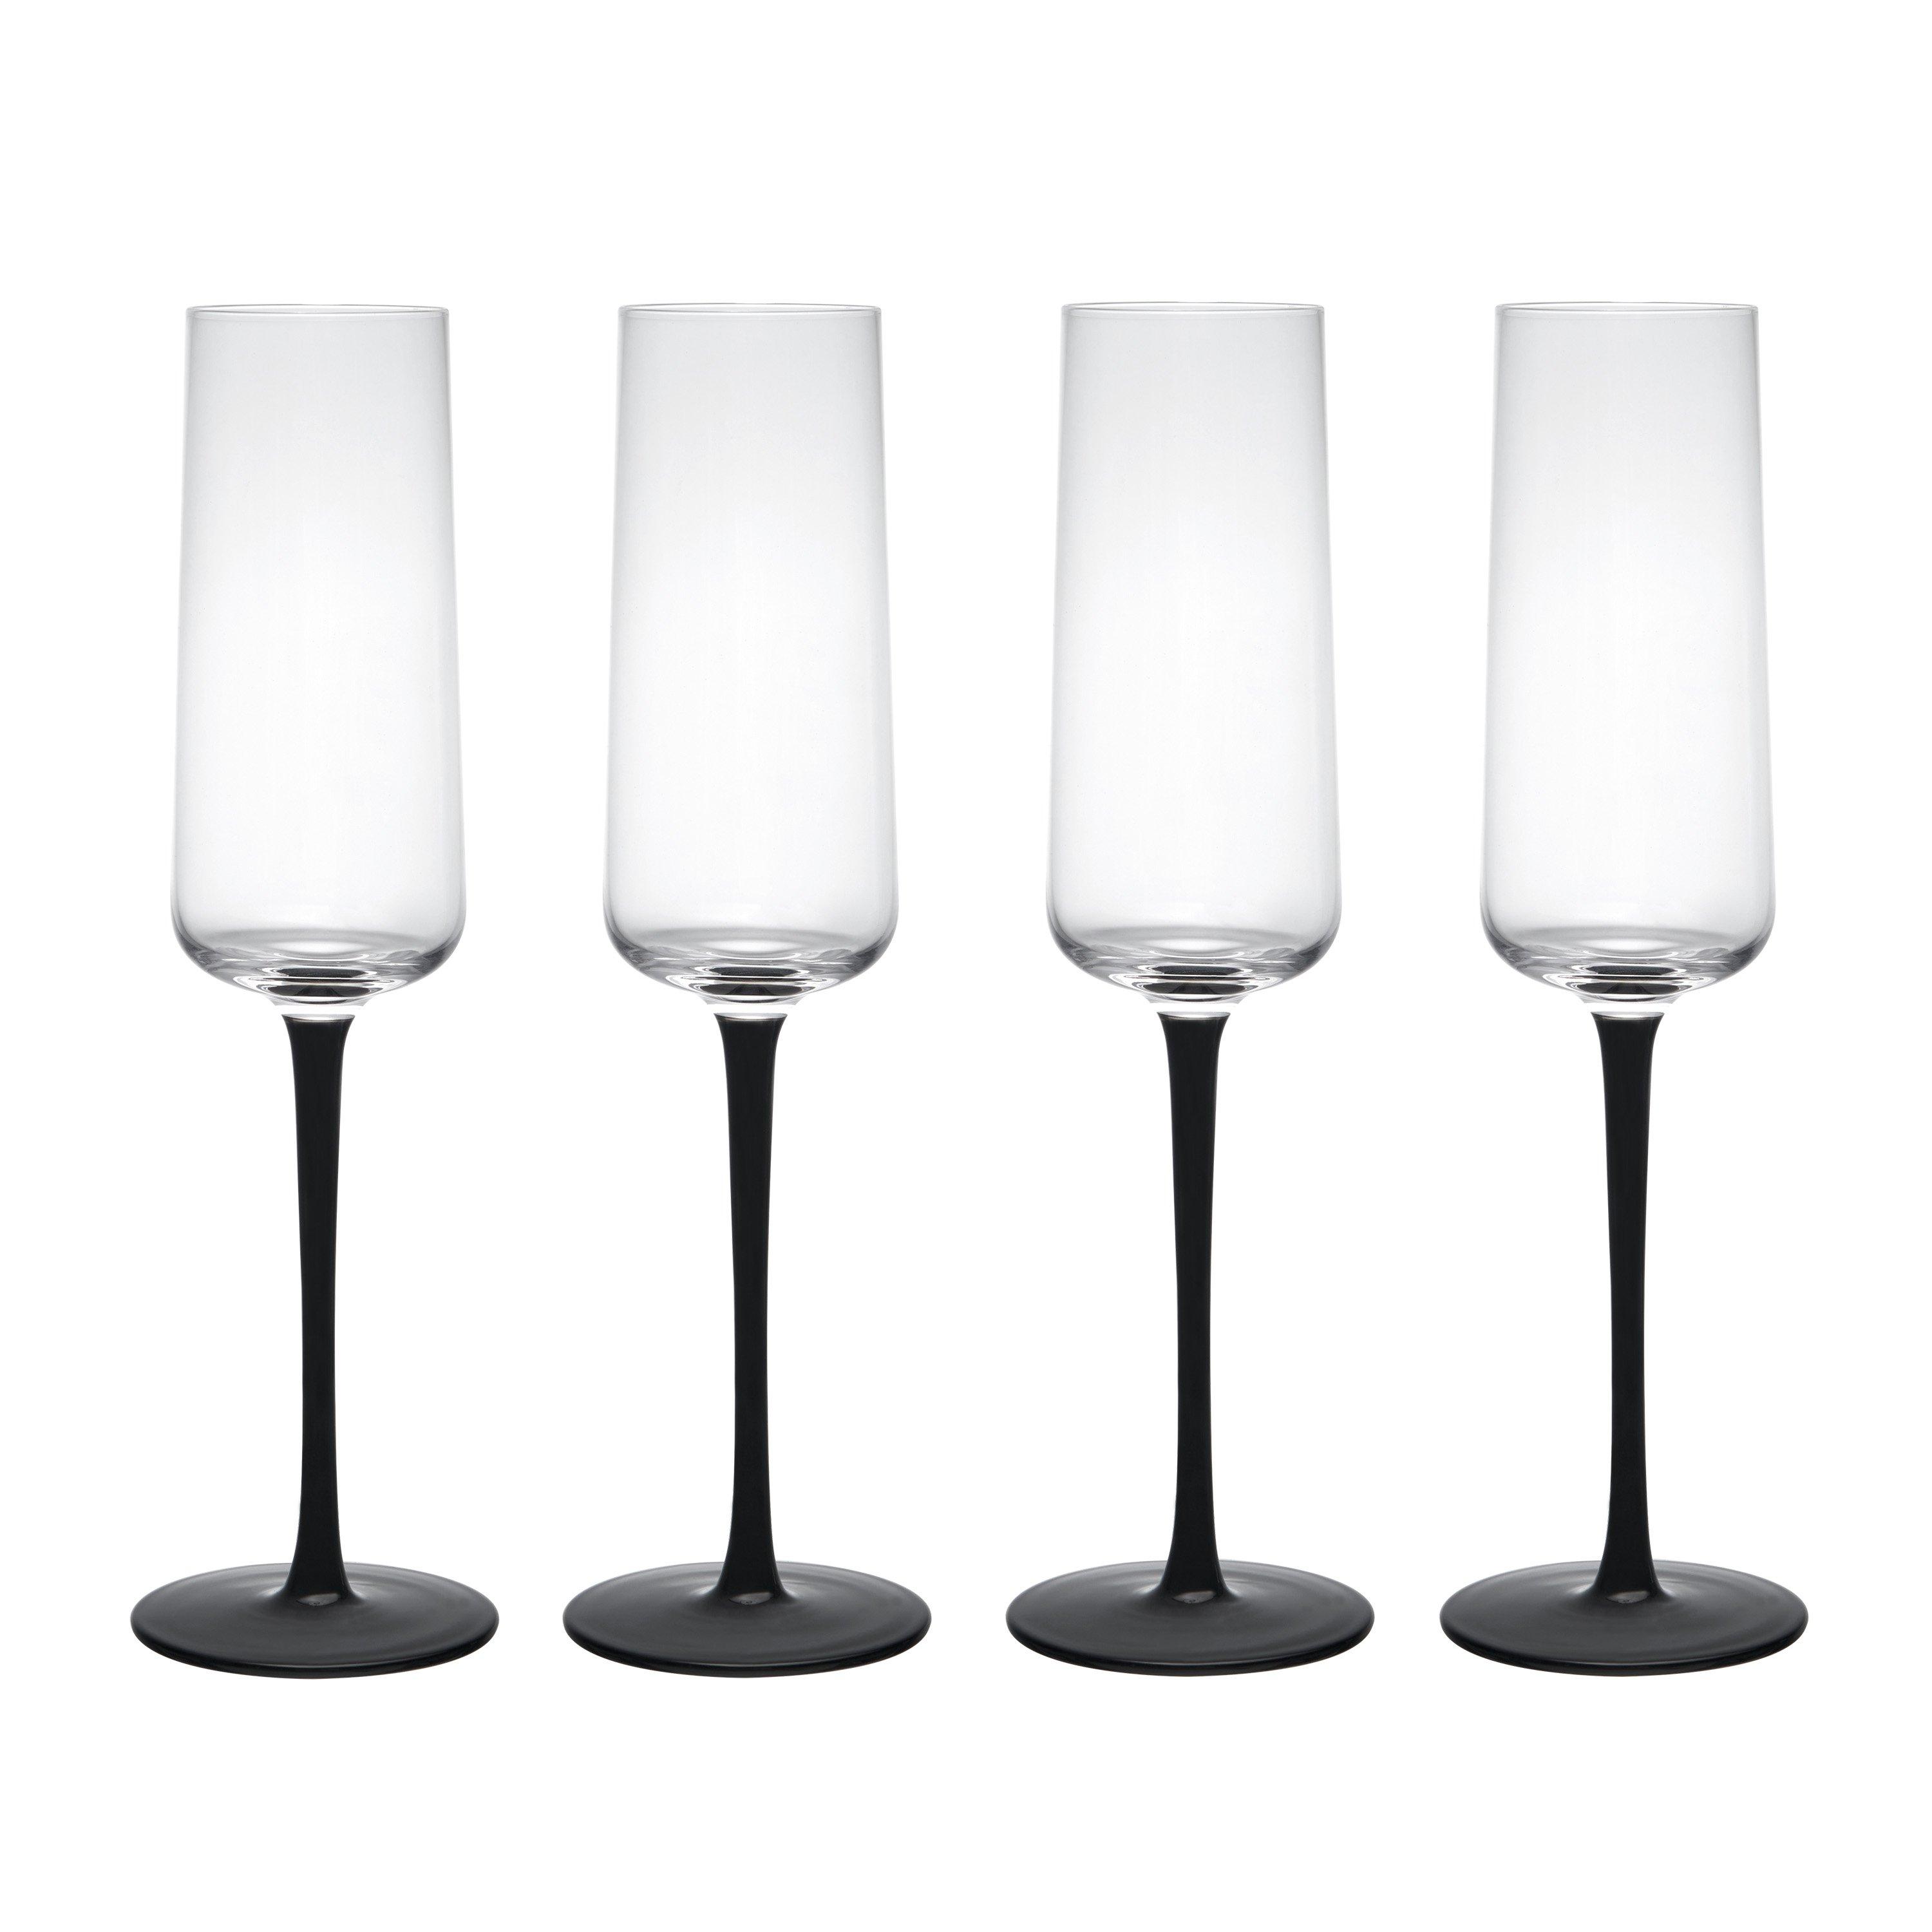 Palermo Crystal Champagne Flutes, Set of 4, 250ml